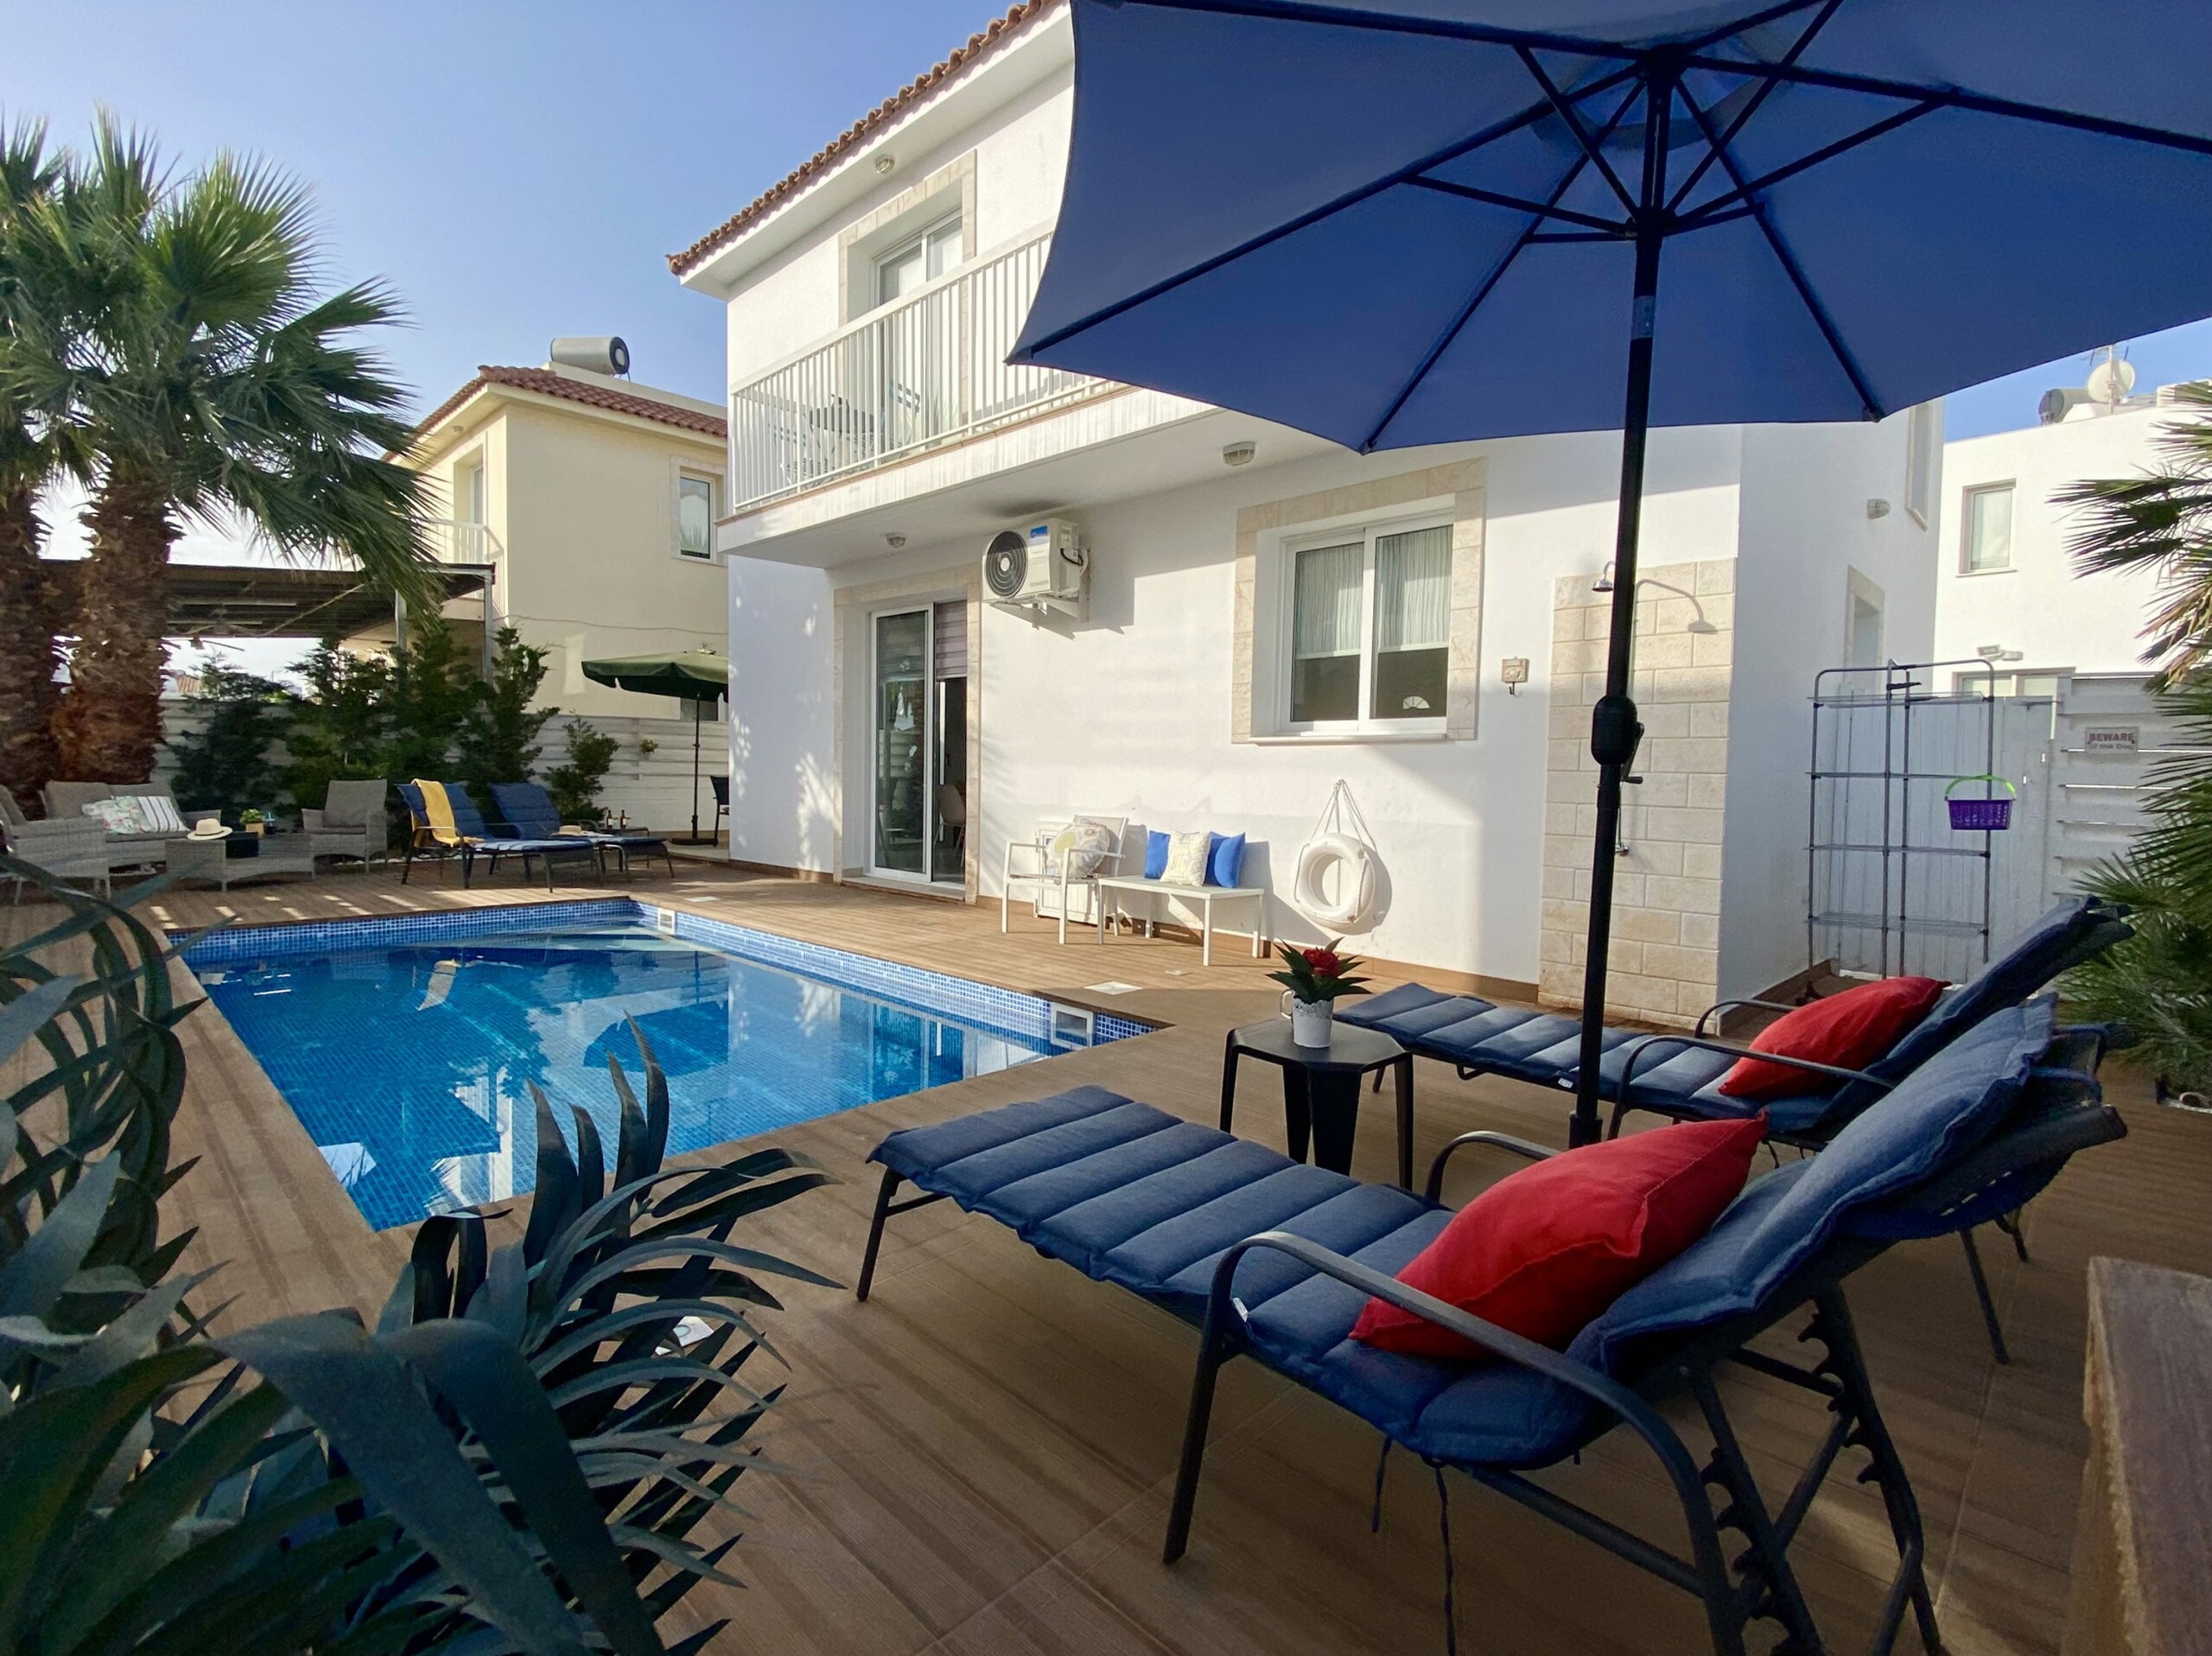 Property Image 1 - Scandi Inspired Villa with Awesome Pool and Deck Area